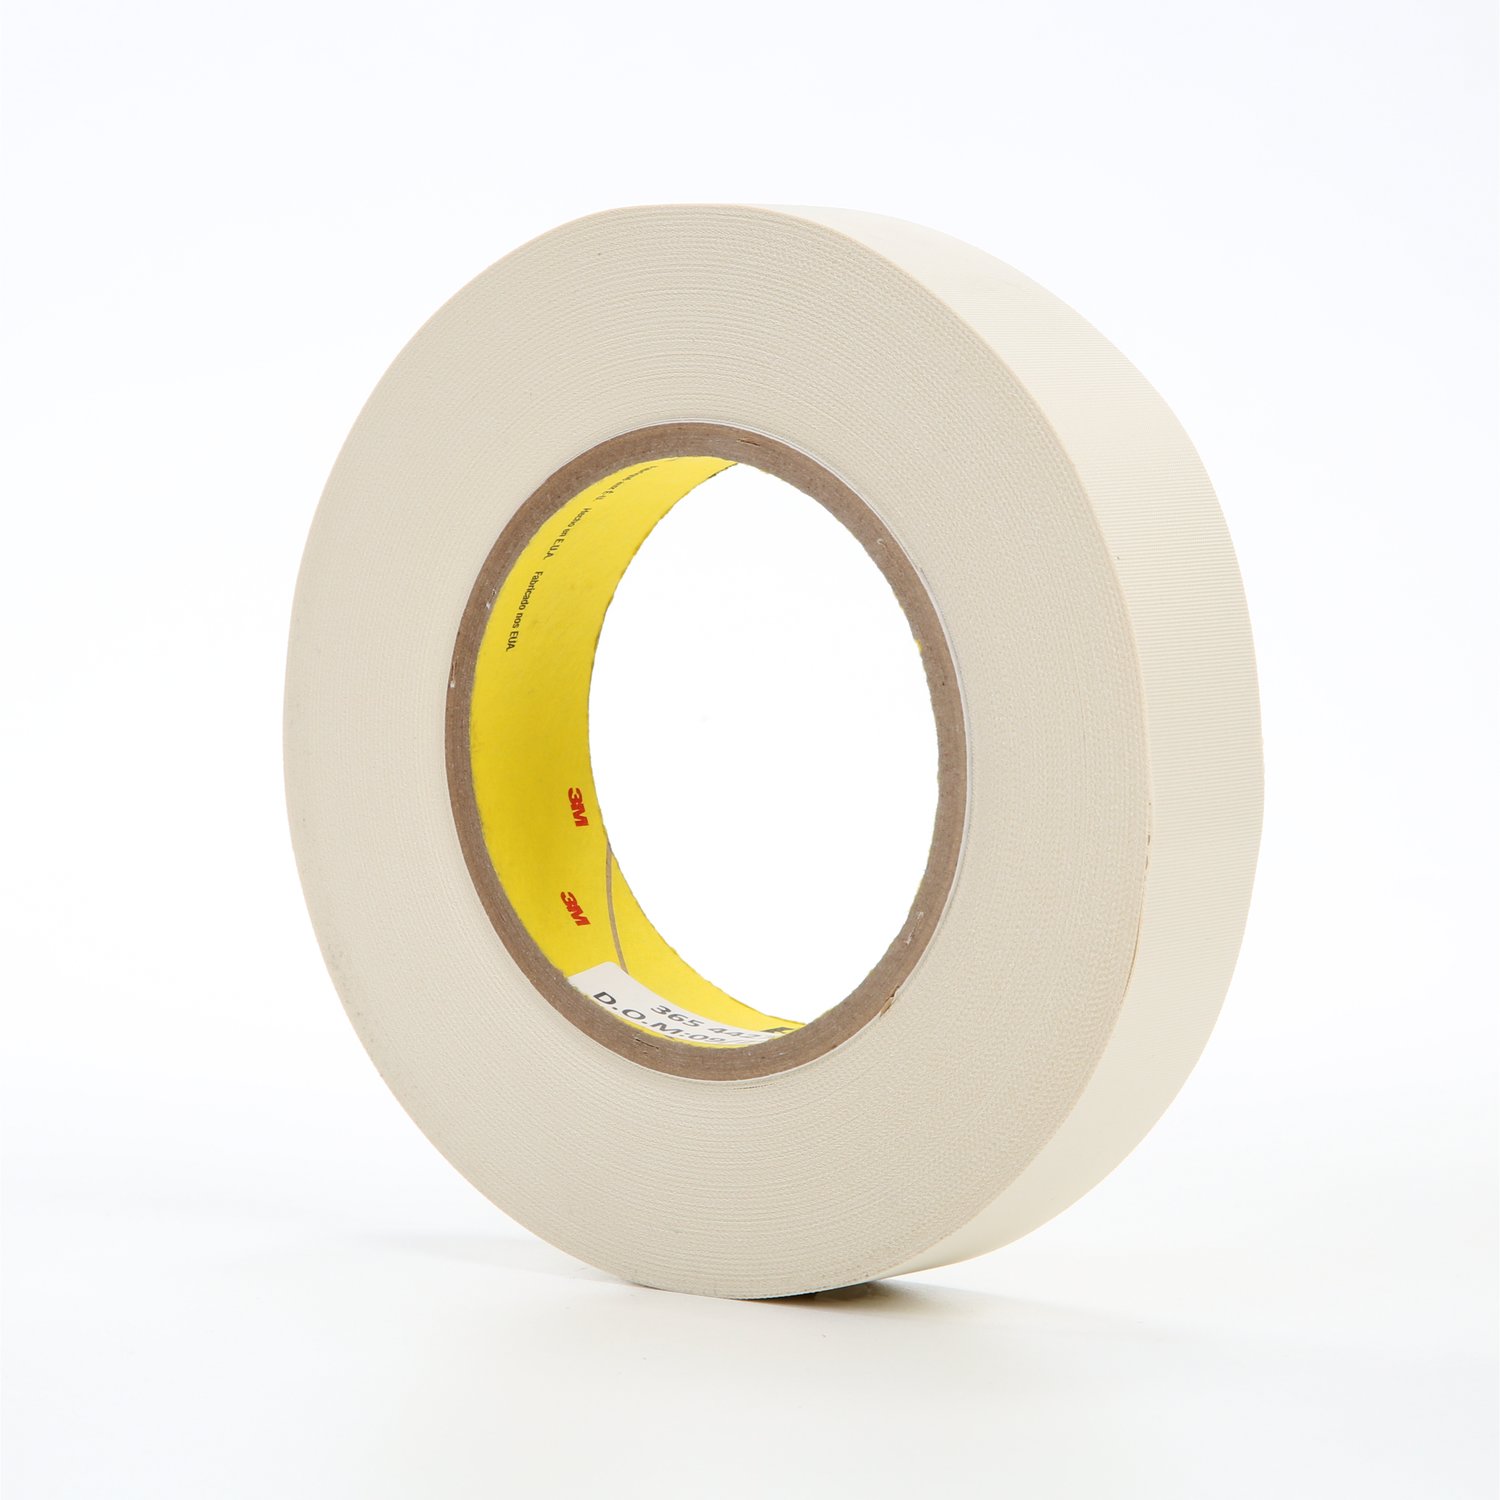 7100025247 - 3M Thermosetable Glass Cloth Tape 365, White, 1 in x 60 yd, 8.3 mil, 36
rolls per case